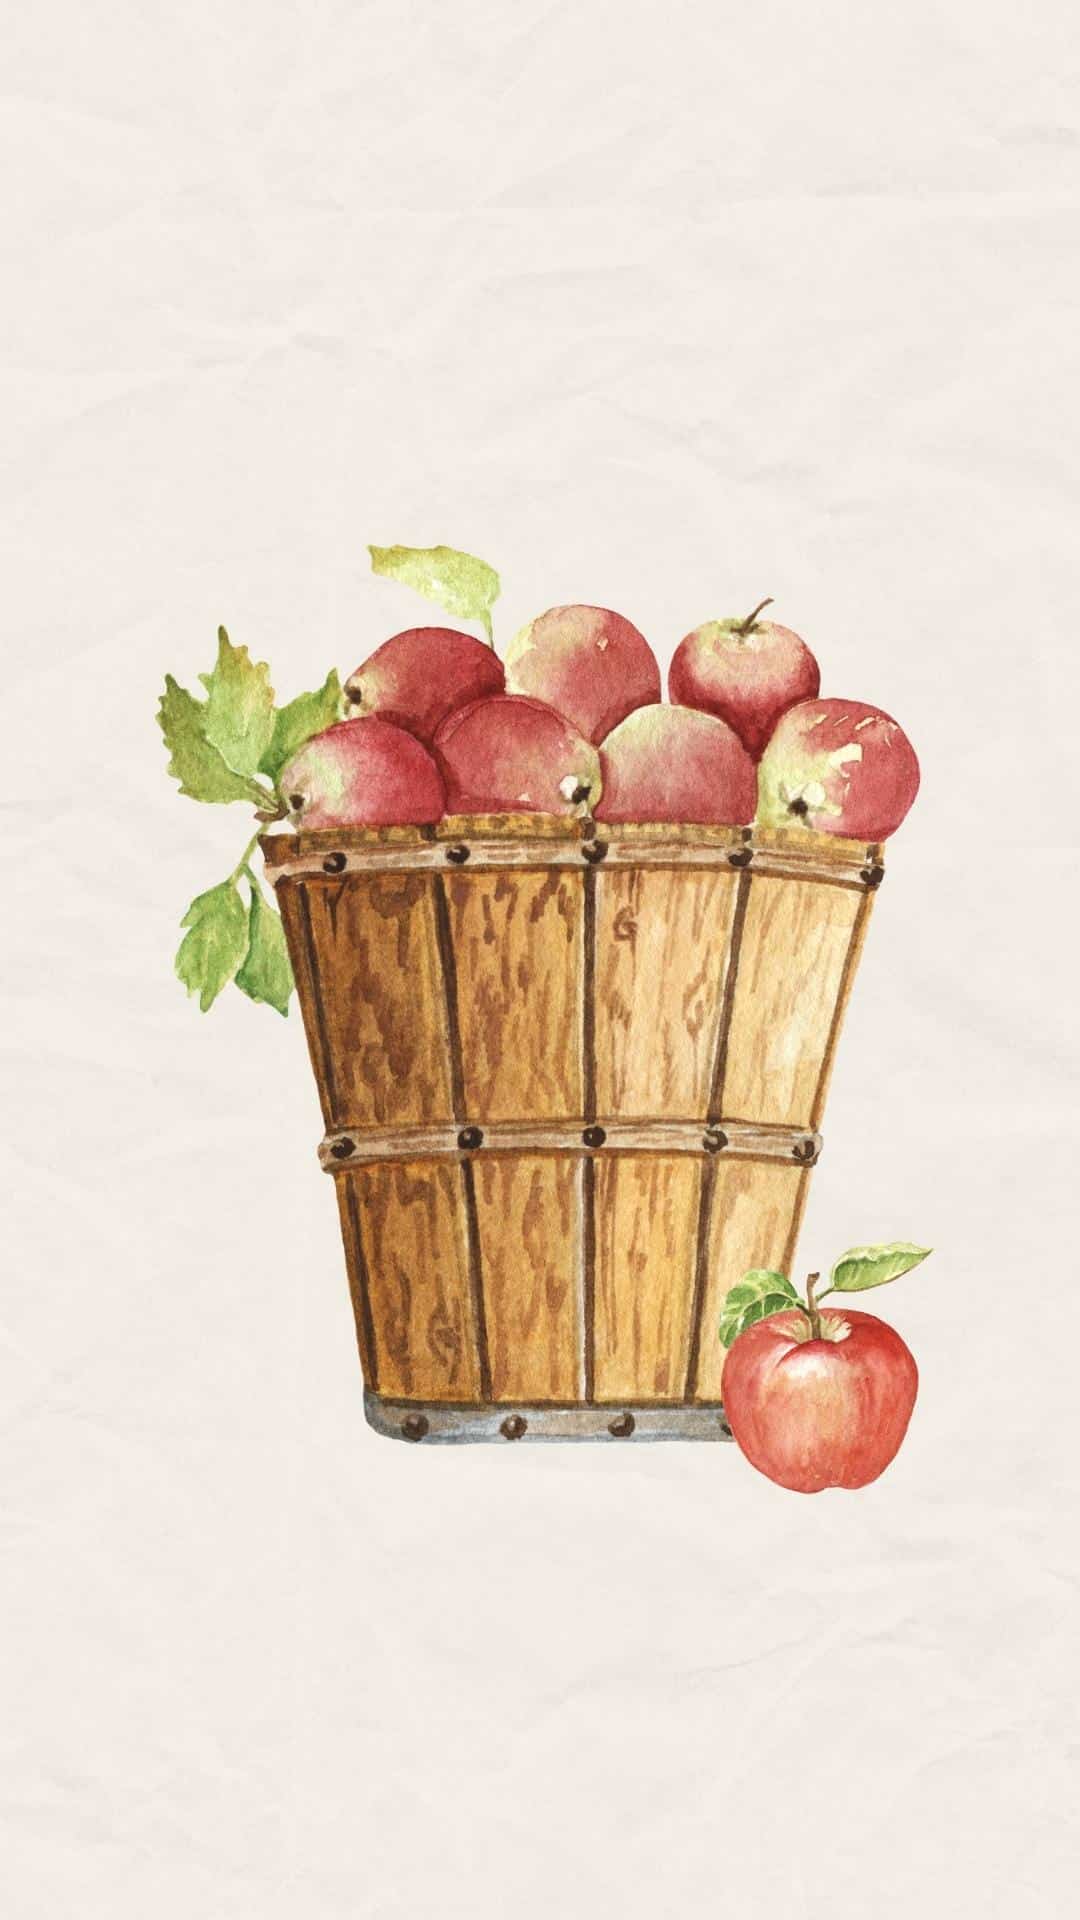 FREE fall iphone background - vintage apple picking background with basket and red apples.